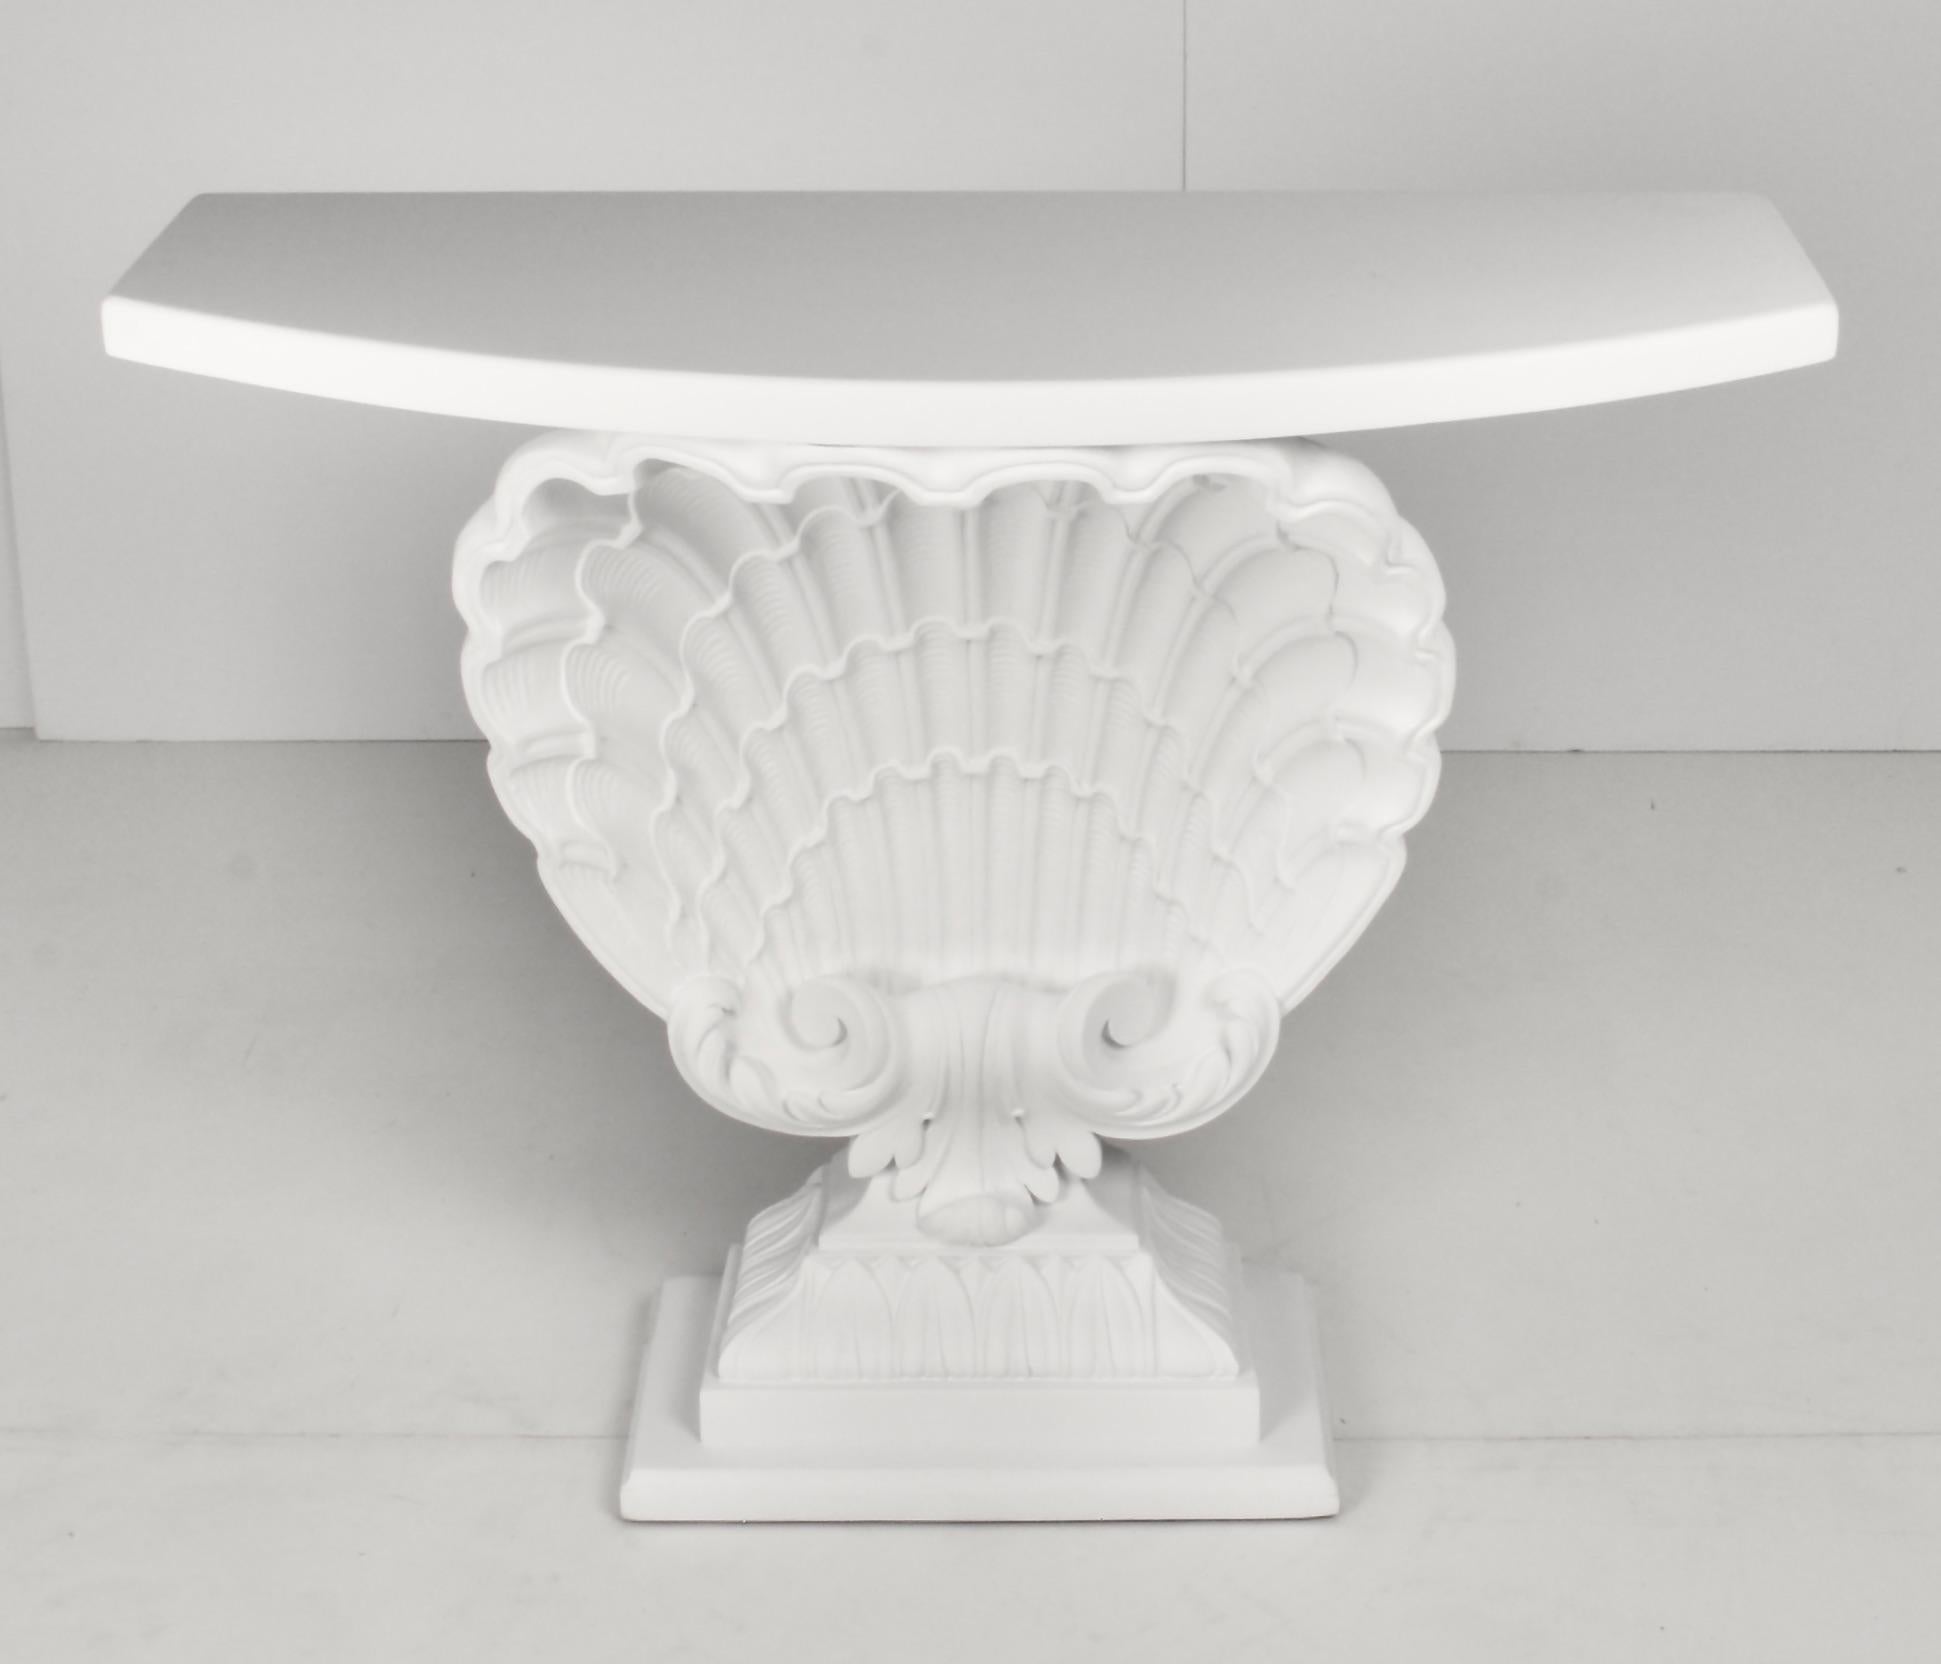 A beautifully restored, classic Hollywood Regency shell-form console by Grosfeld House. Newly painted in plaster white with a super flat finish. Excellent condition.